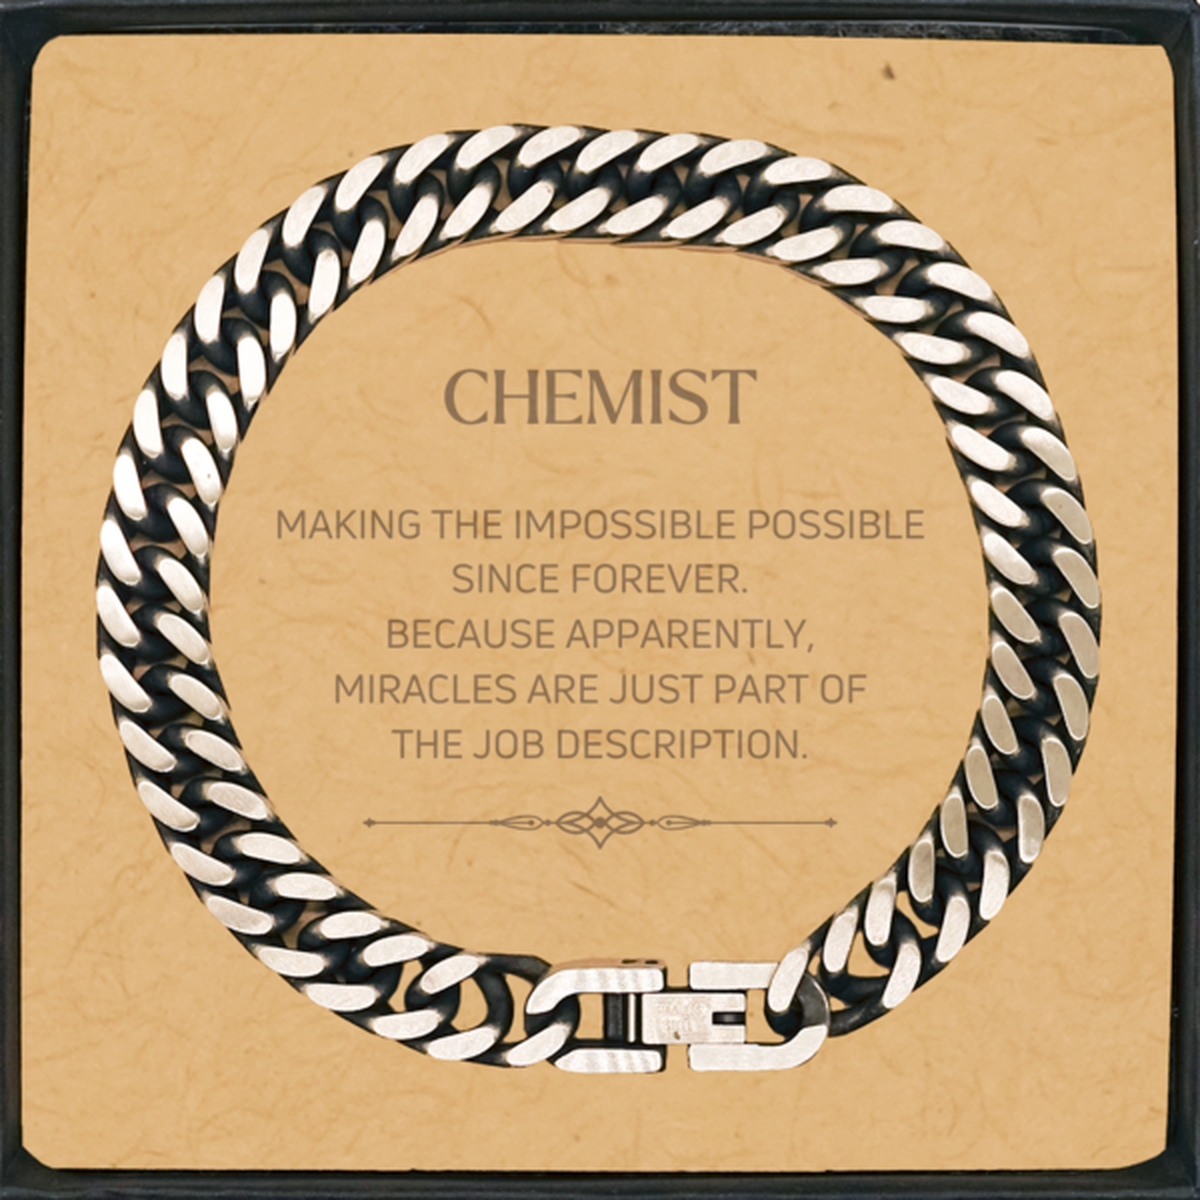 Funny Chemist Gifts, Miracles are just part of the job description, Inspirational Birthday Cuban Link Chain Bracelet For Chemist, Men, Women, Coworkers, Friends, Boss